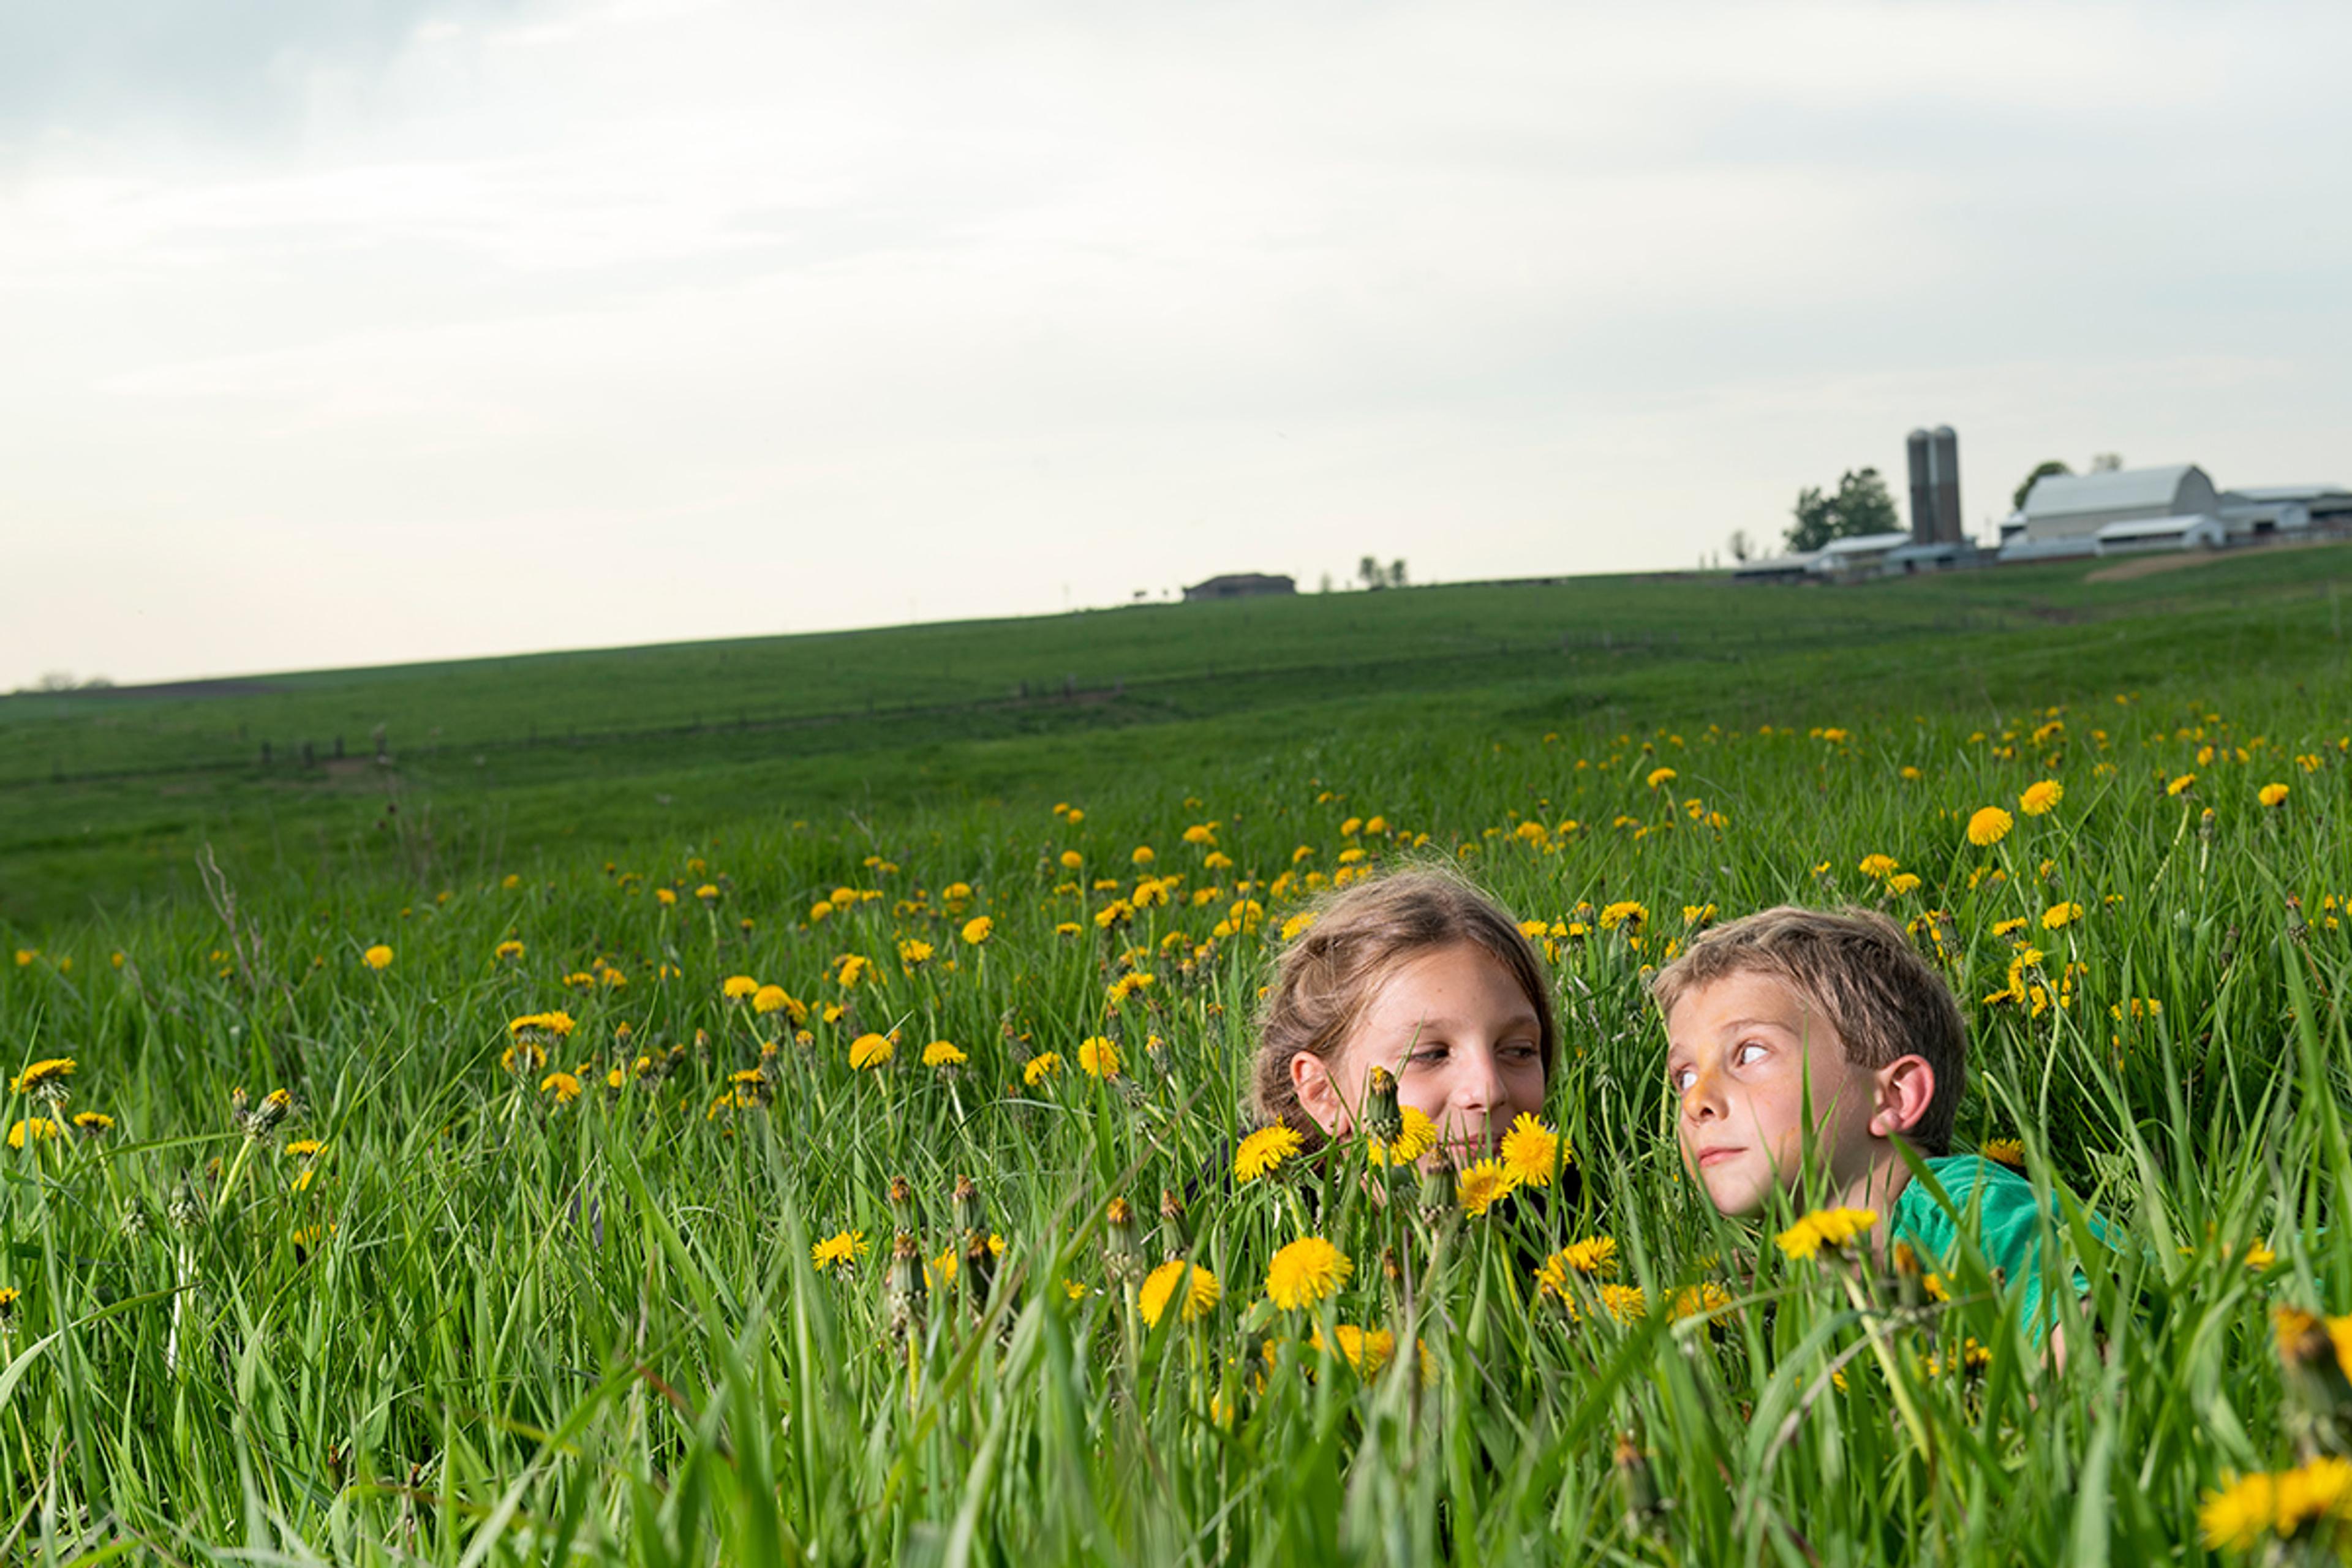 A boy and girl’s heads poke up from a field of tall green grass and yellow dandelions in a pasture that is in front of a barn. The children are looking at each other with goofy expressions.